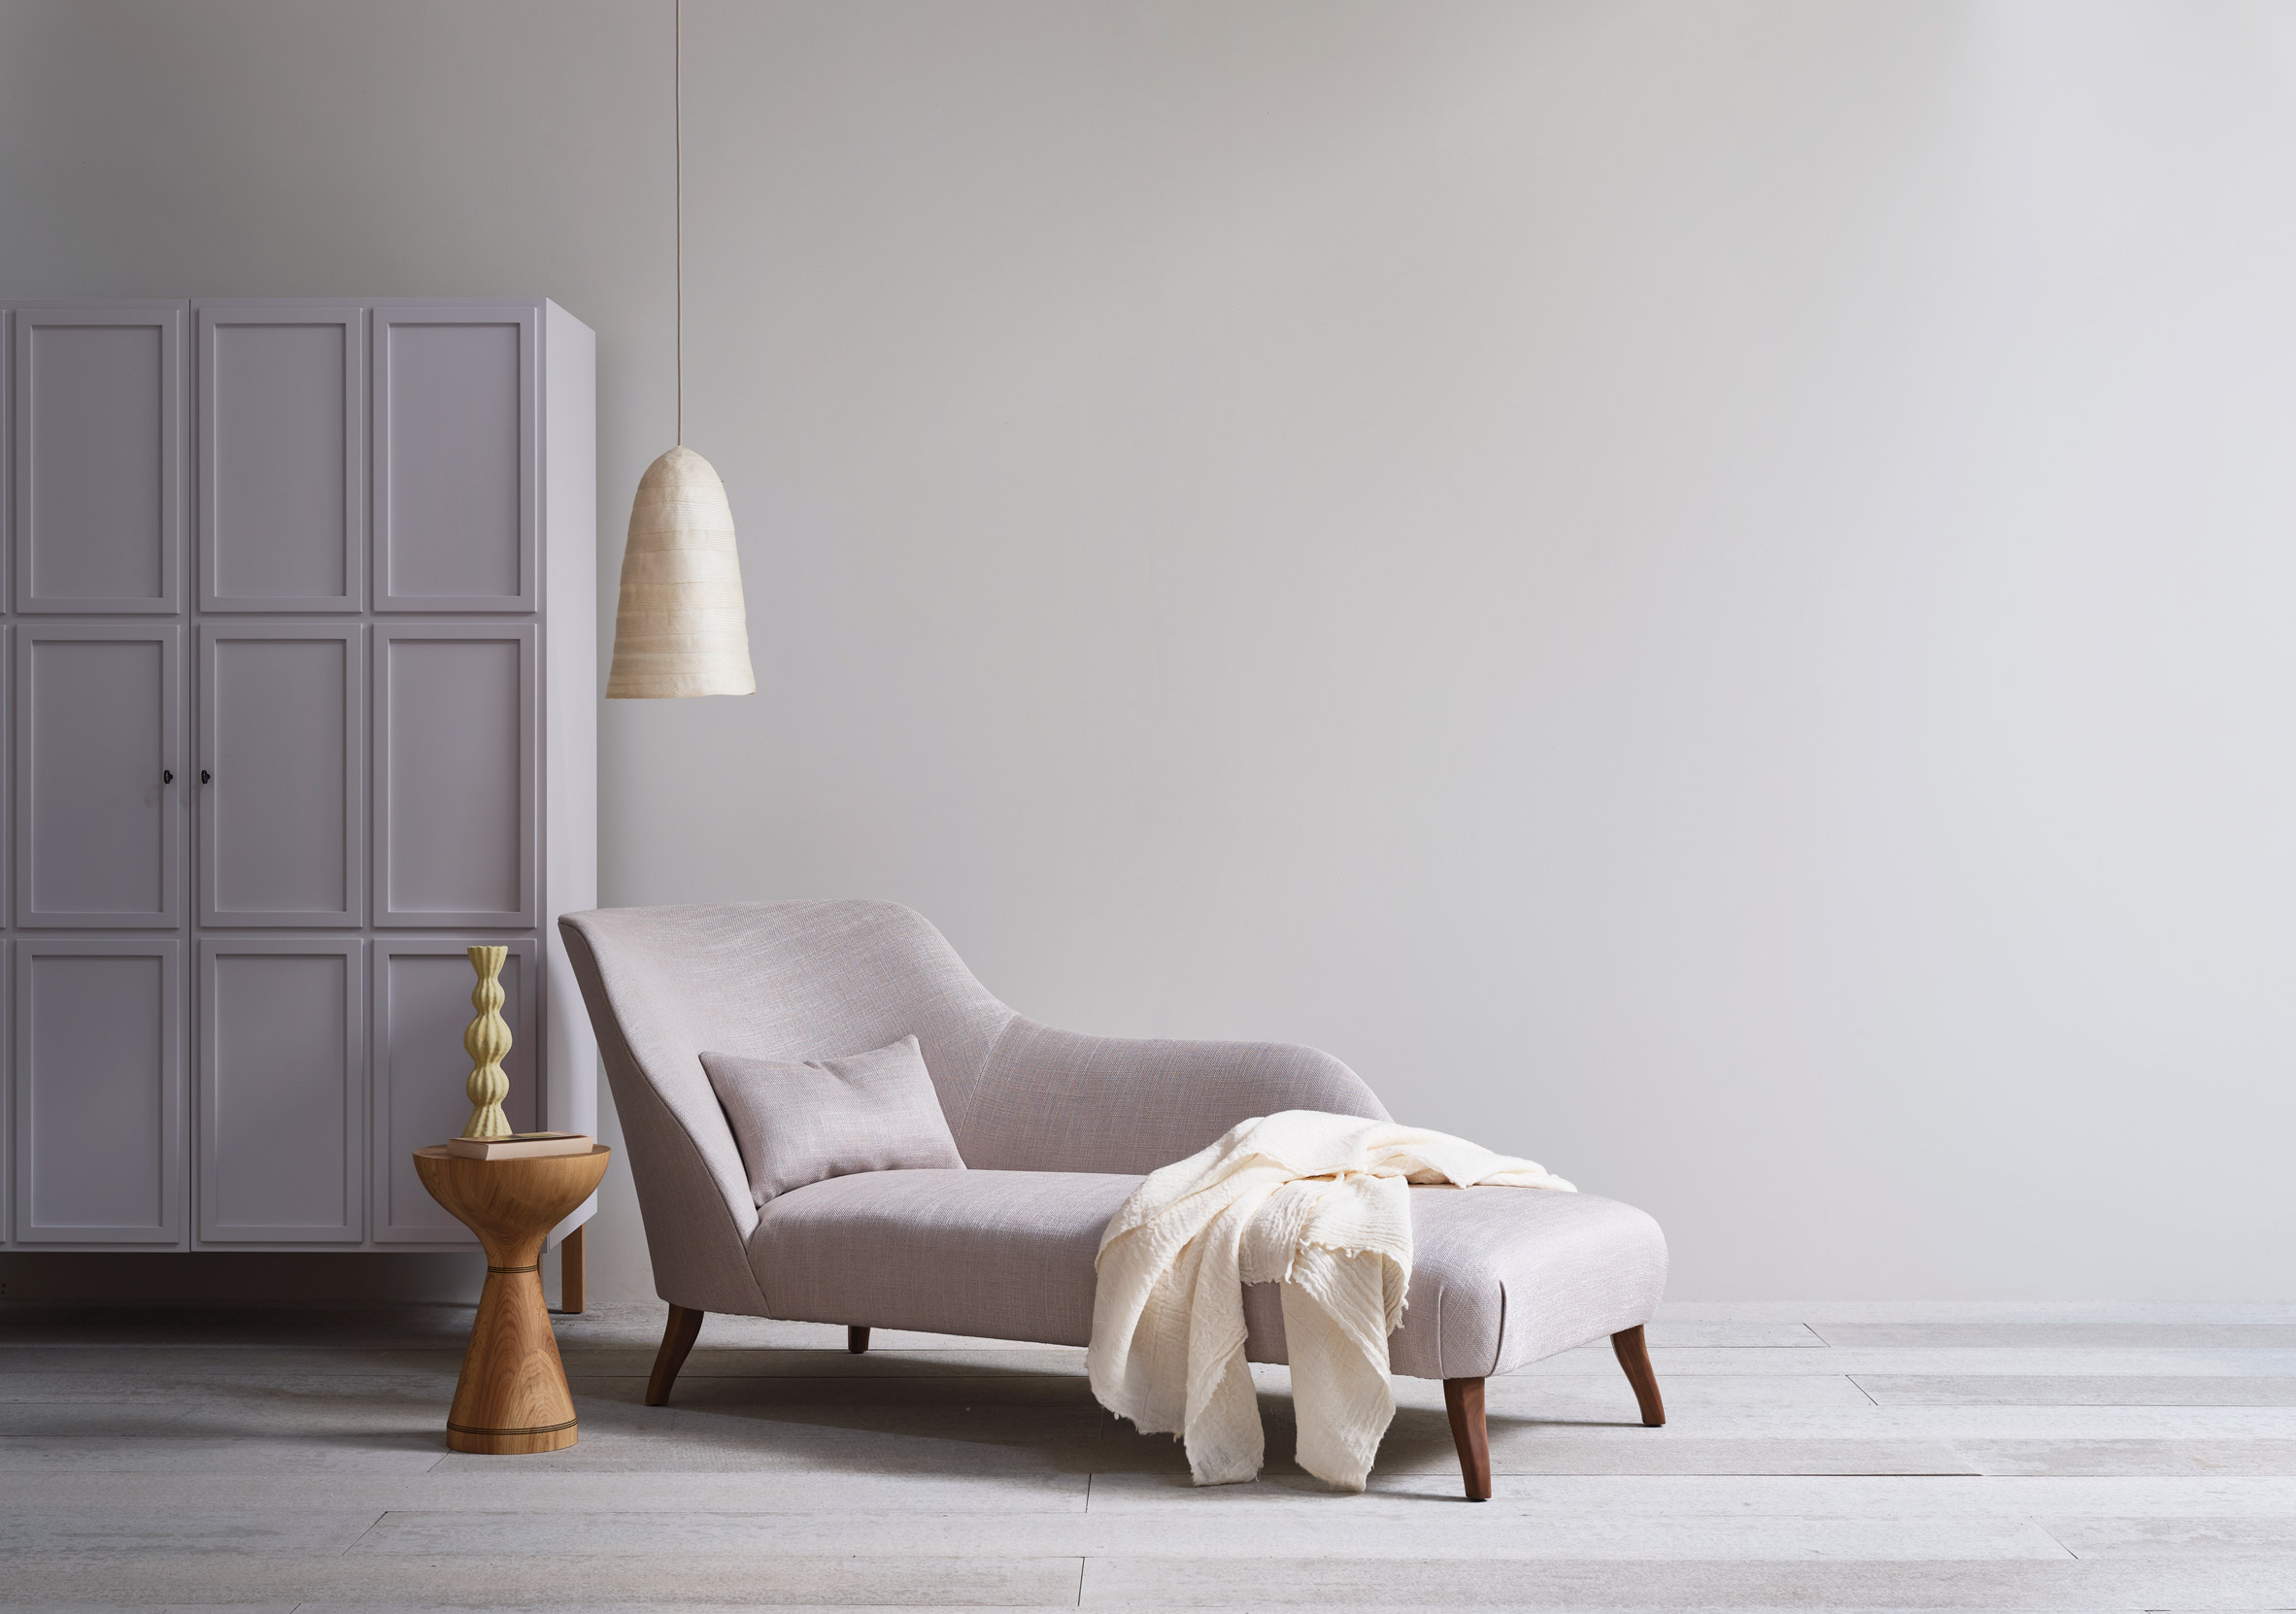 Pinch adds new products to its bedroom furniture collection